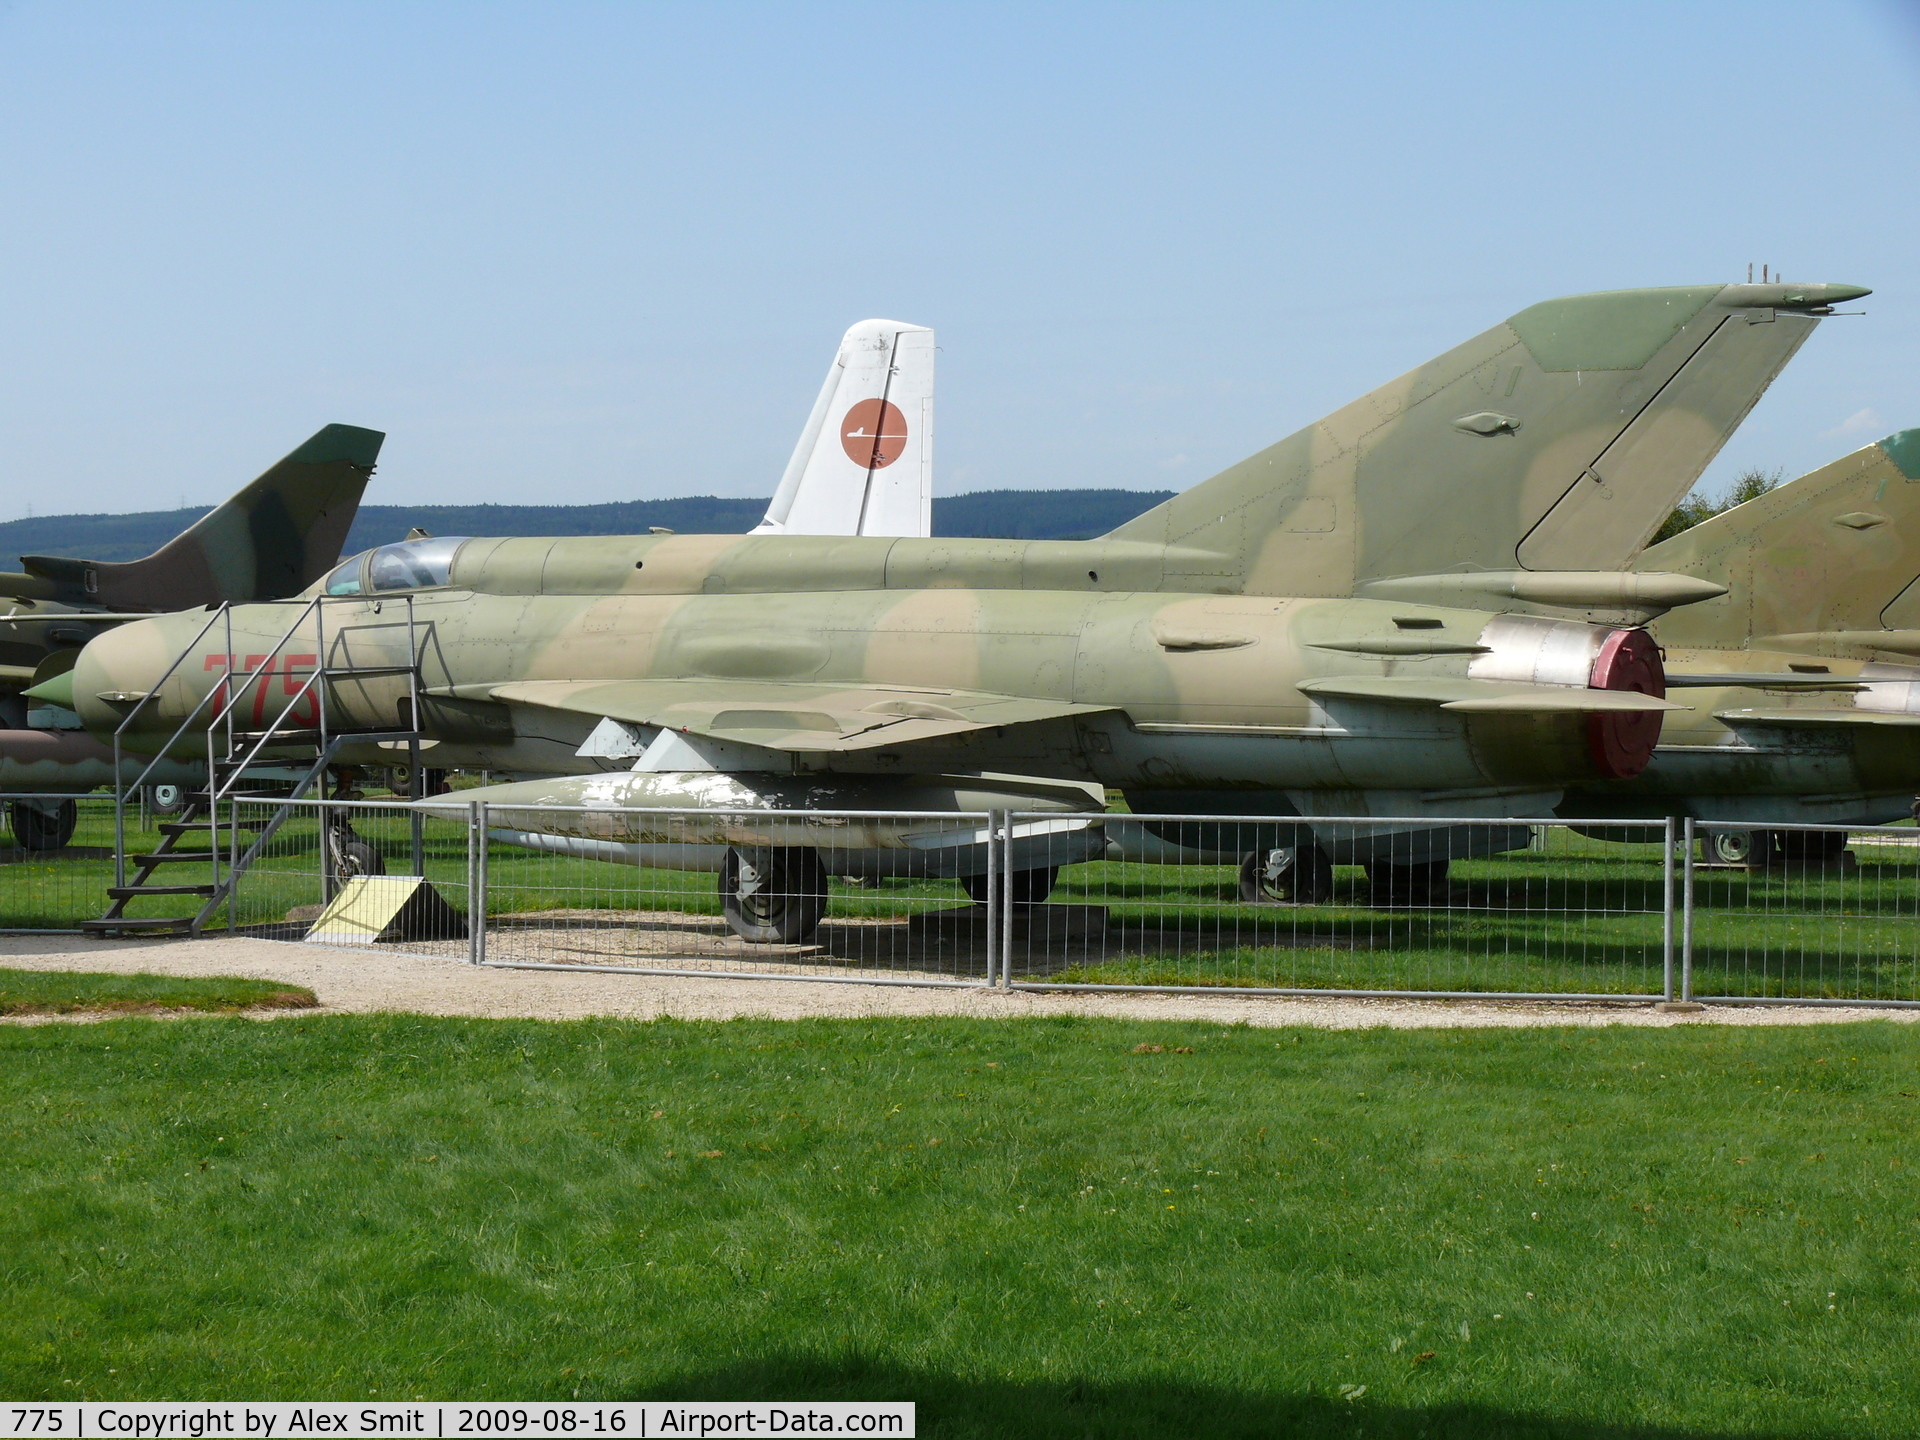 775, Mikoyan-Gurevich MiG-21MF C/N 96002003, Mikoyan Guerevich Mig21MF Fishbed 775 East German Air Force in ther Hermerskeil Museum Flugausstellung Junior